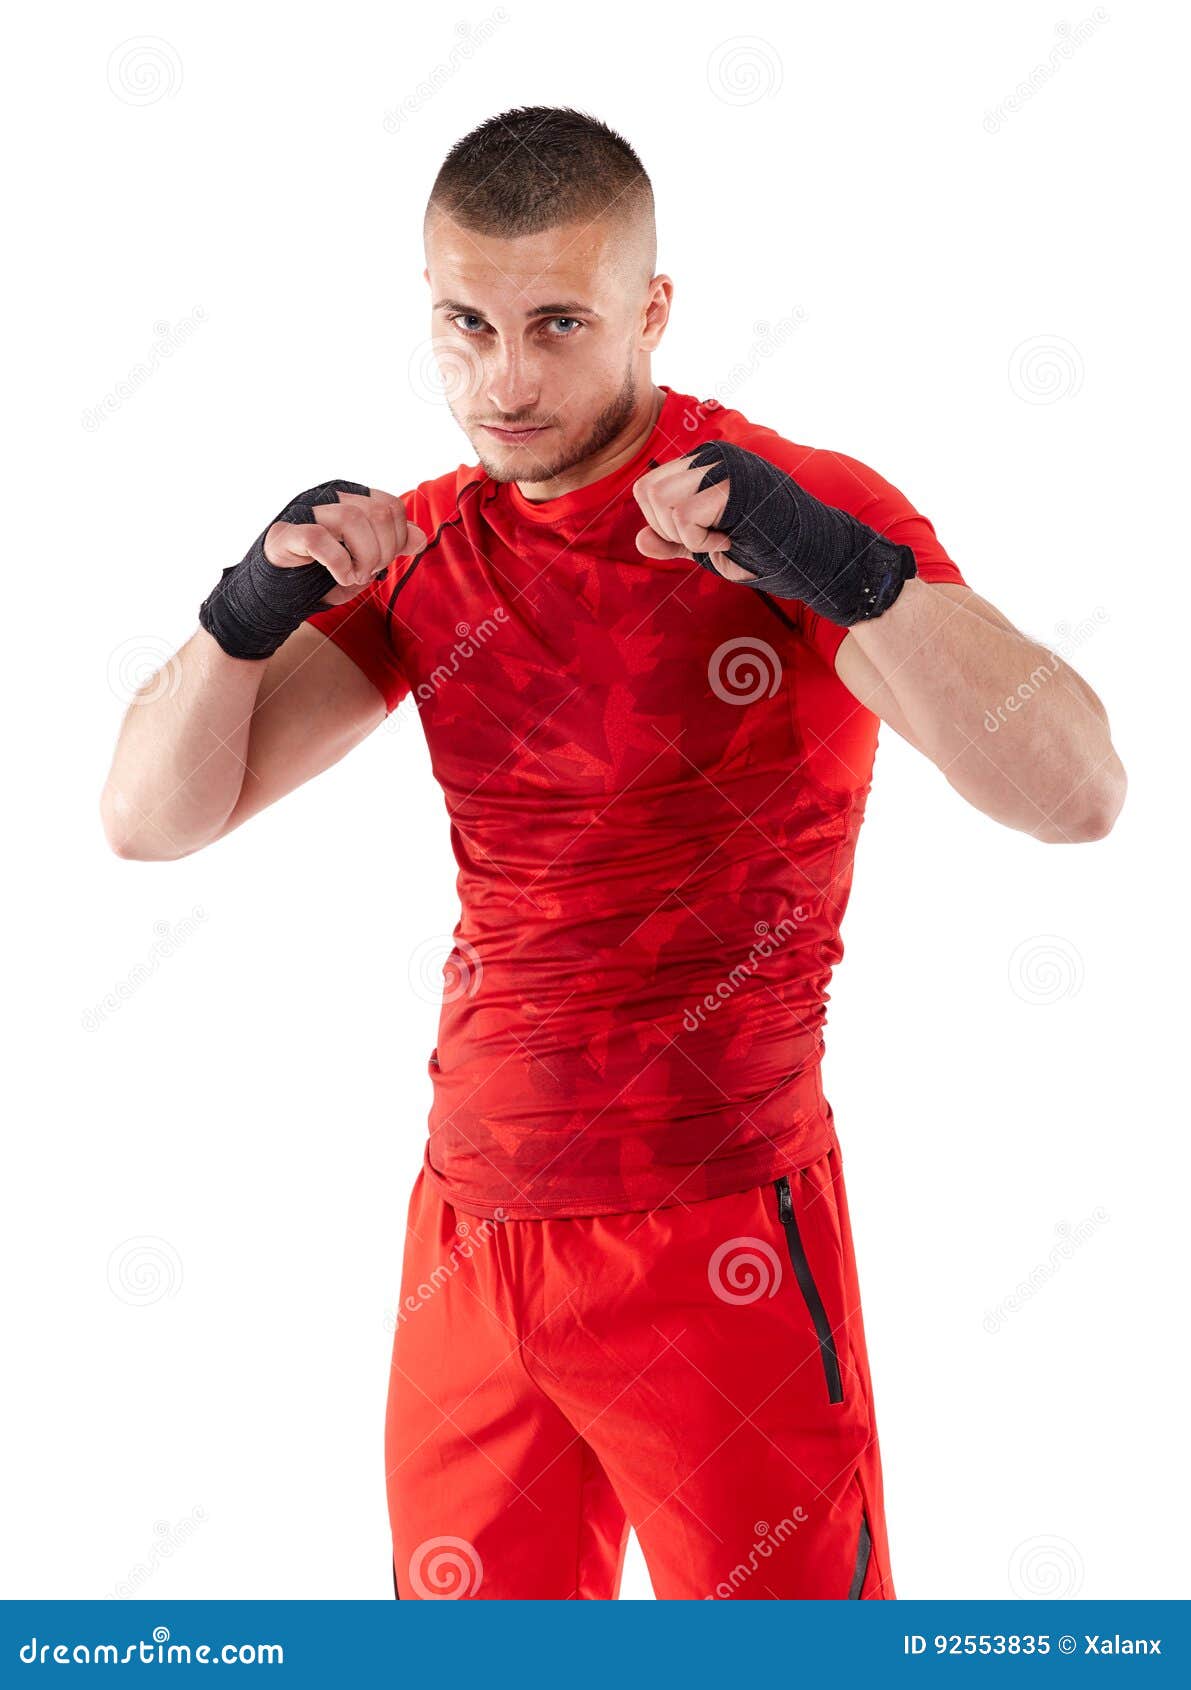 Kickbox Fighter in Guard Stance Stock Image - Image of action, active ...